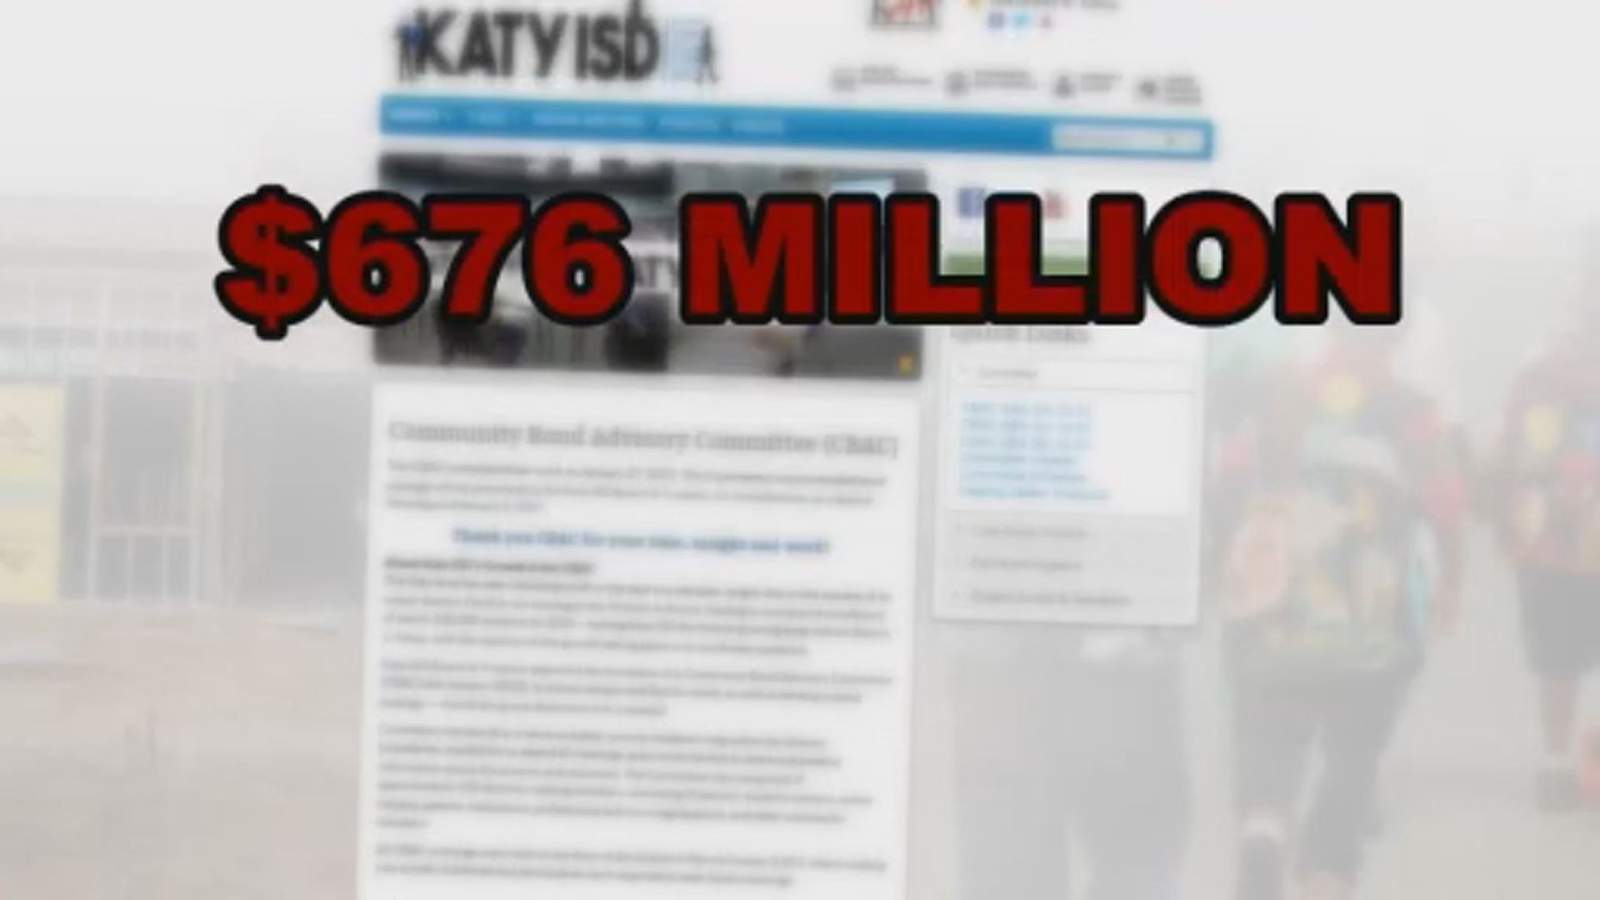 Voters in Katy ISD will vote on $676 million 2021 bond package in May